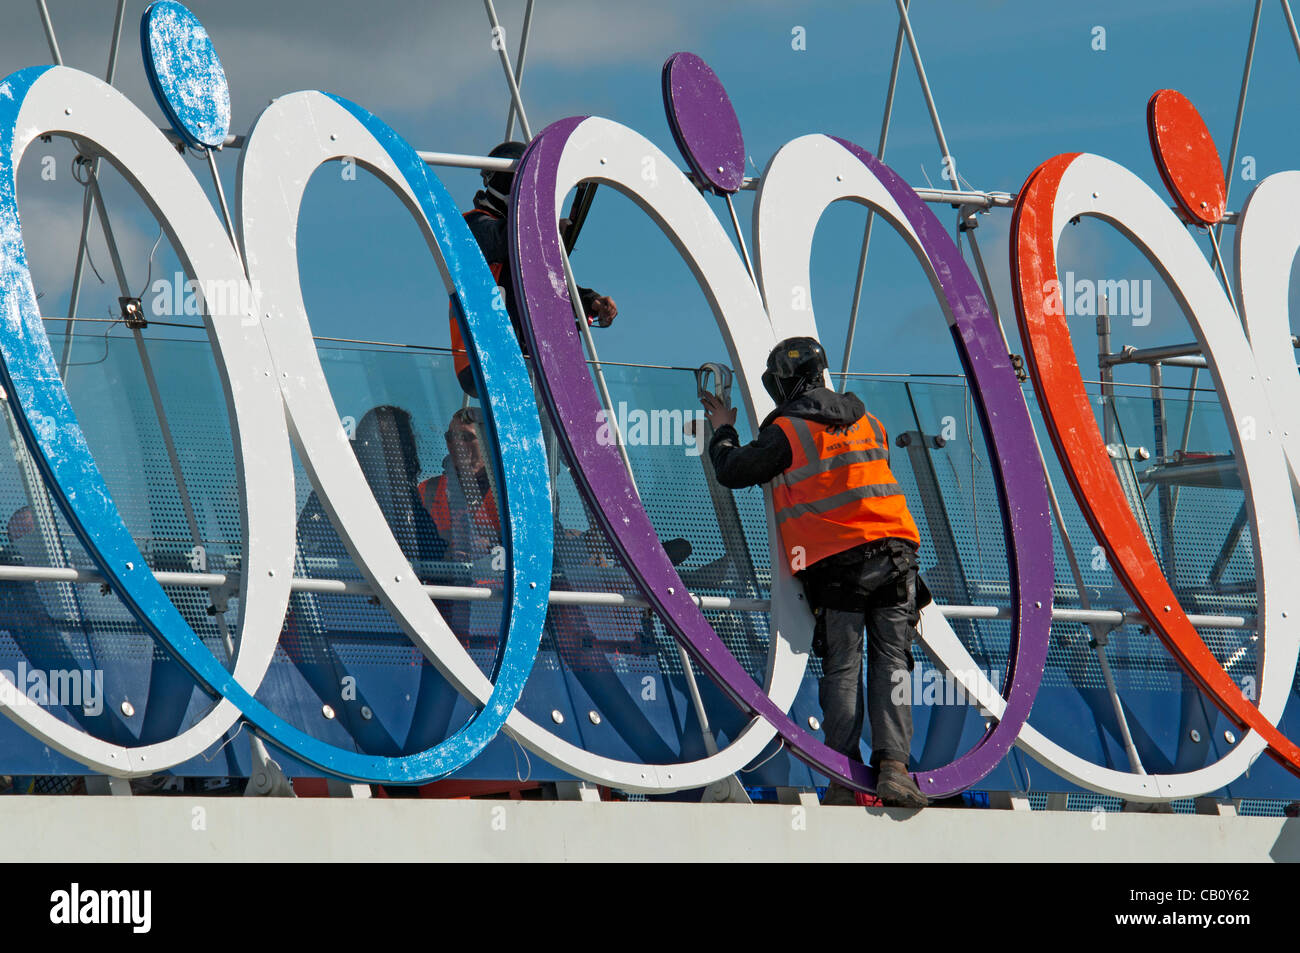 Workman installing an artwork on the Millennium (Lowry) footbridge in preparation for the Looping the Loop event at Salford Quays, held on Sat 19th May. The event marked the start of the London 2012 'Games Time' in North West England and the first day of the Olympic torch relay in the UK. Stock Photo